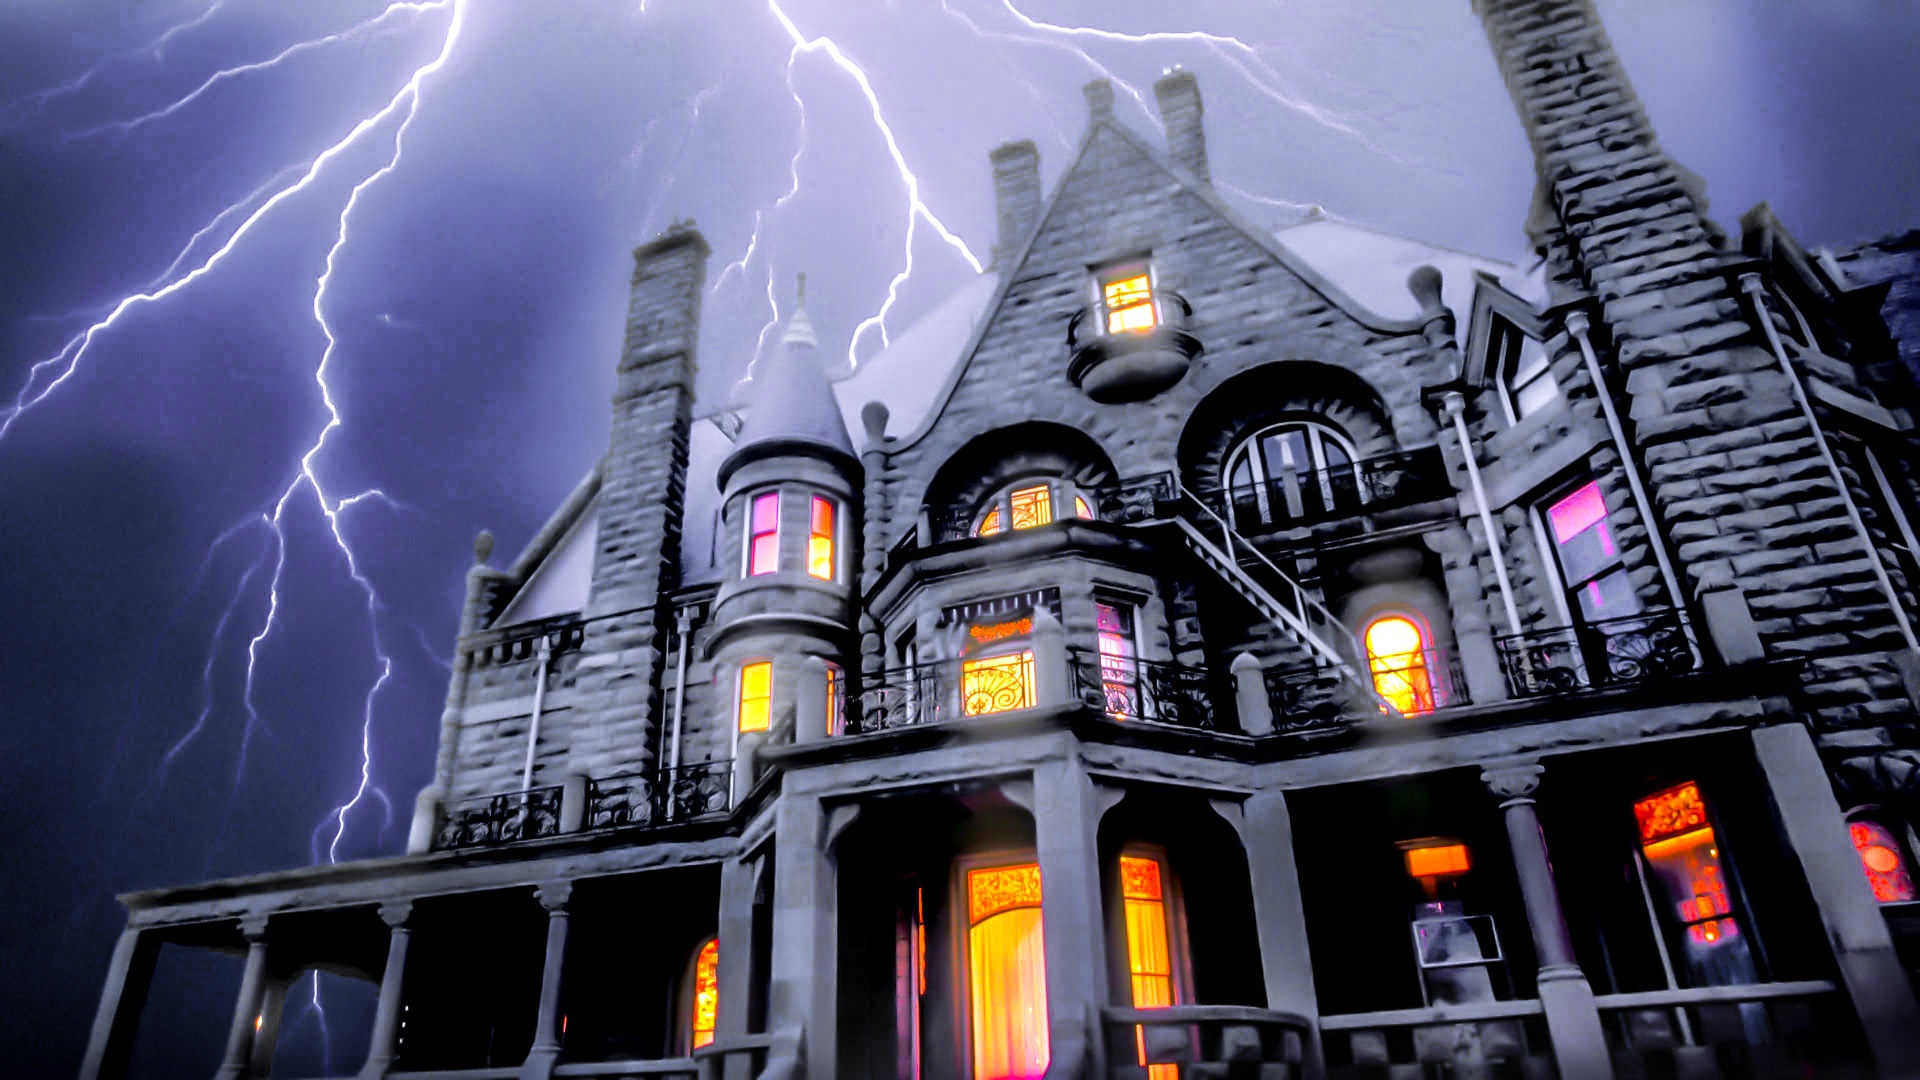 Creepy House on a Stormy Night